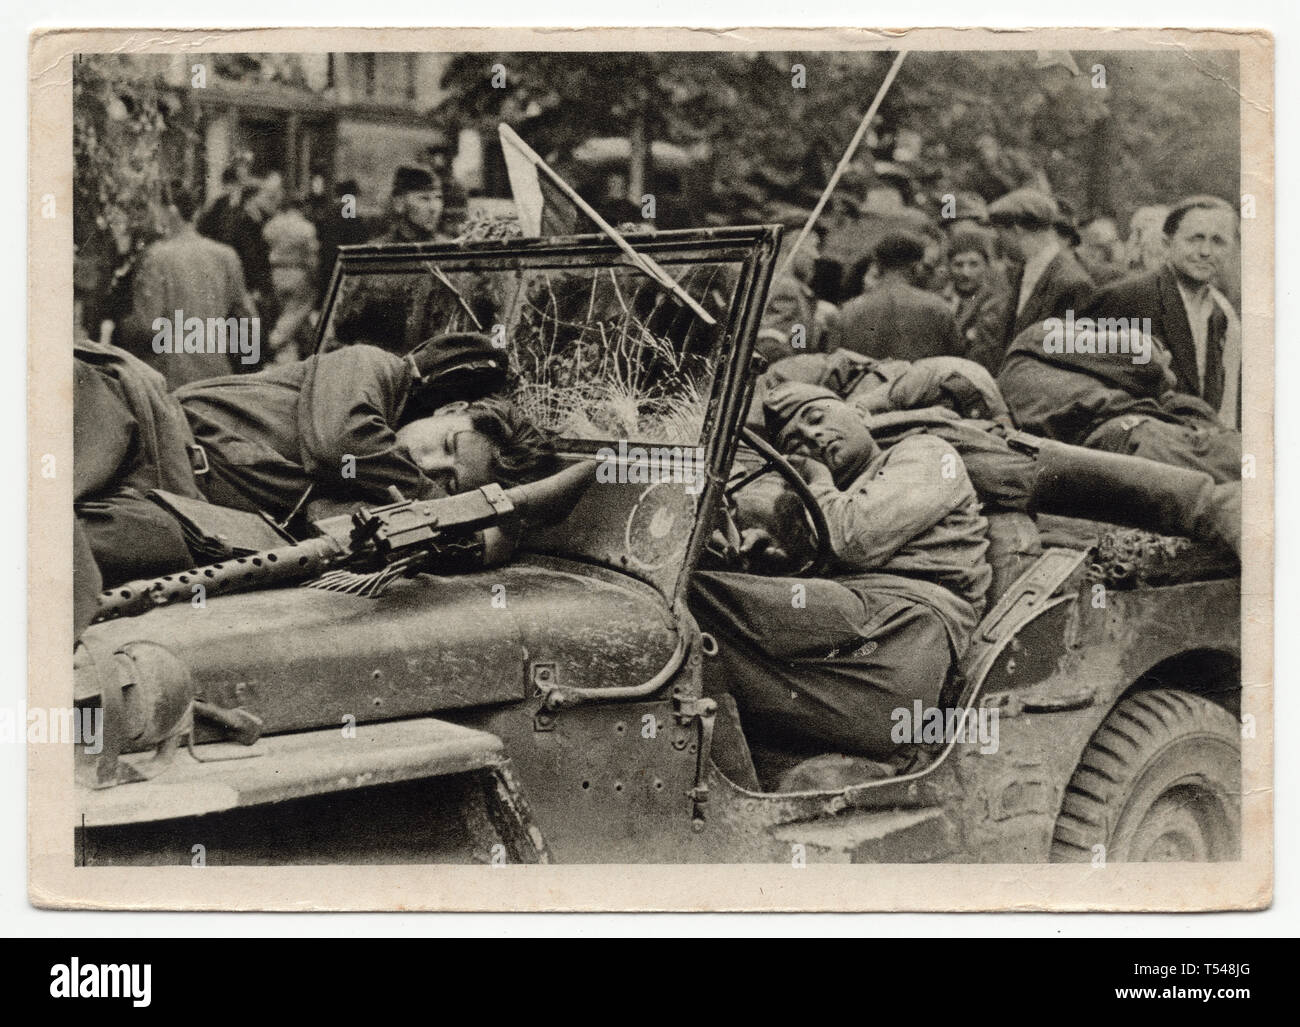 Red Army soldiers sleep in and on the US military jeep Willys MB in Prague, Czechoslovakia, on 9 May 1945. Black and white photograph by Czech photographer Zdeněk Tmej taken in May 1945 and issued in the Czechoslovak vintage postcard in 1945. Courtesy of the Azoor Postcard Collection. Stock Photo